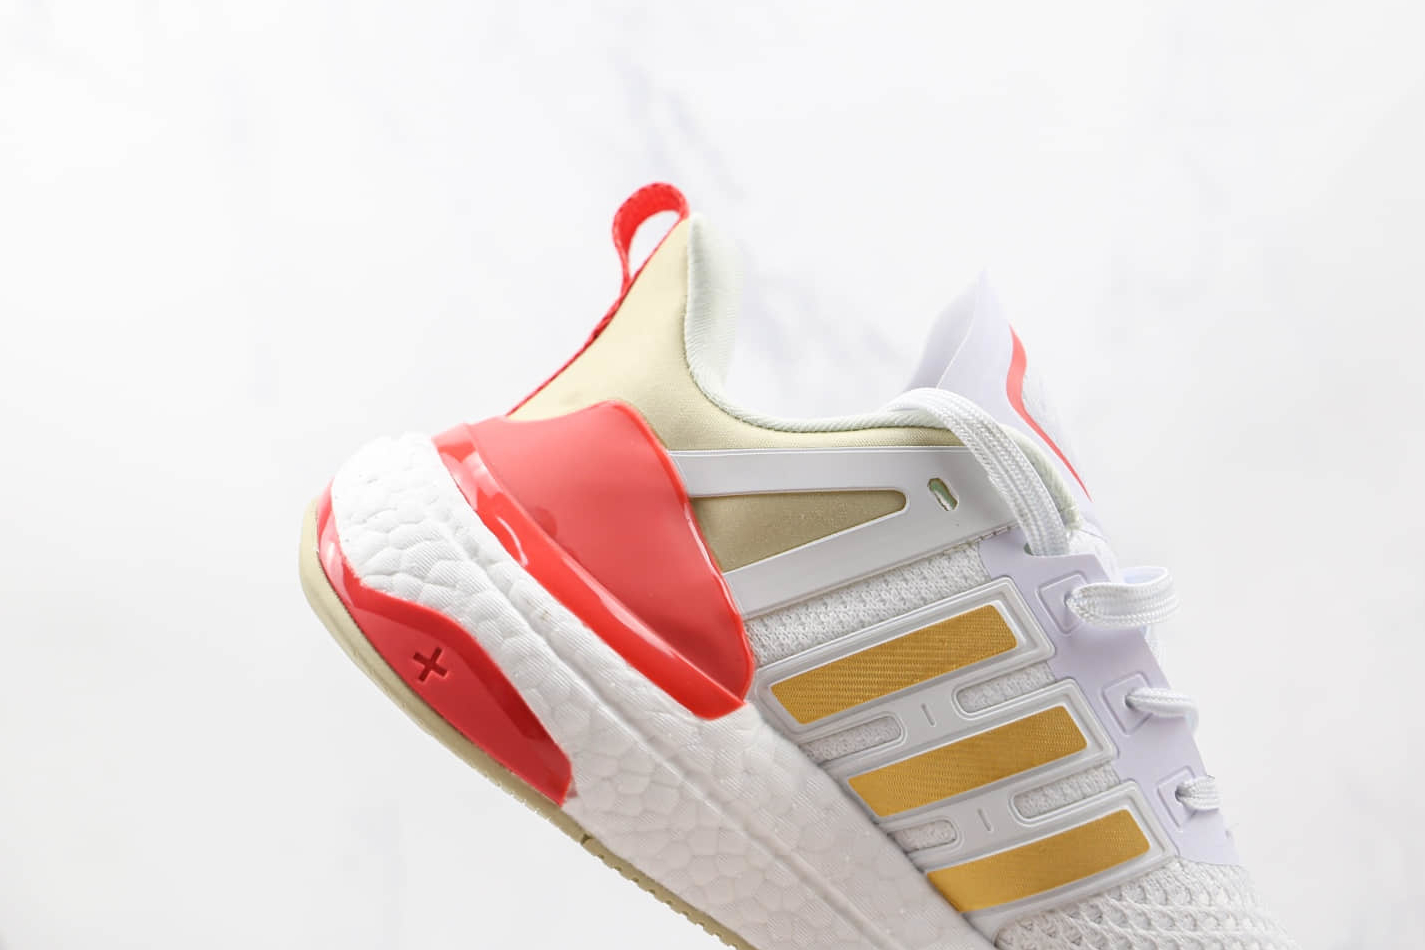 Adidas Equipment+ Shoes White Golden H02754 - Stylish and Premium Footwear